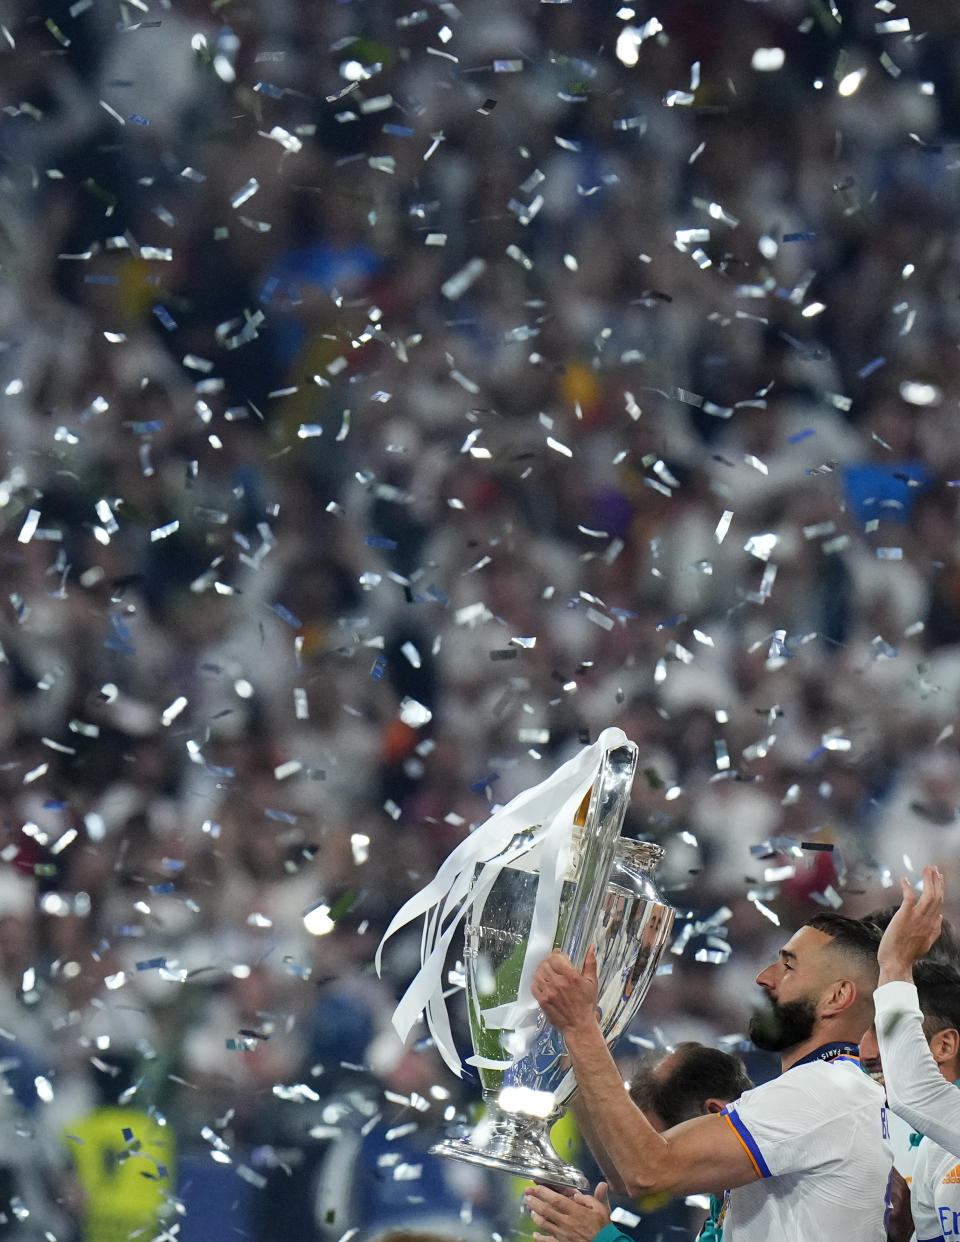 Real Madrid's Karim Benzema holds the trophy after the Champions League final soccer match between Liverpool and Real Madrid at the Stade de France in Saint Denis near Paris, Saturday, May 28, 2022. Real won 1-0. (AP Photo/Petr David Josek)